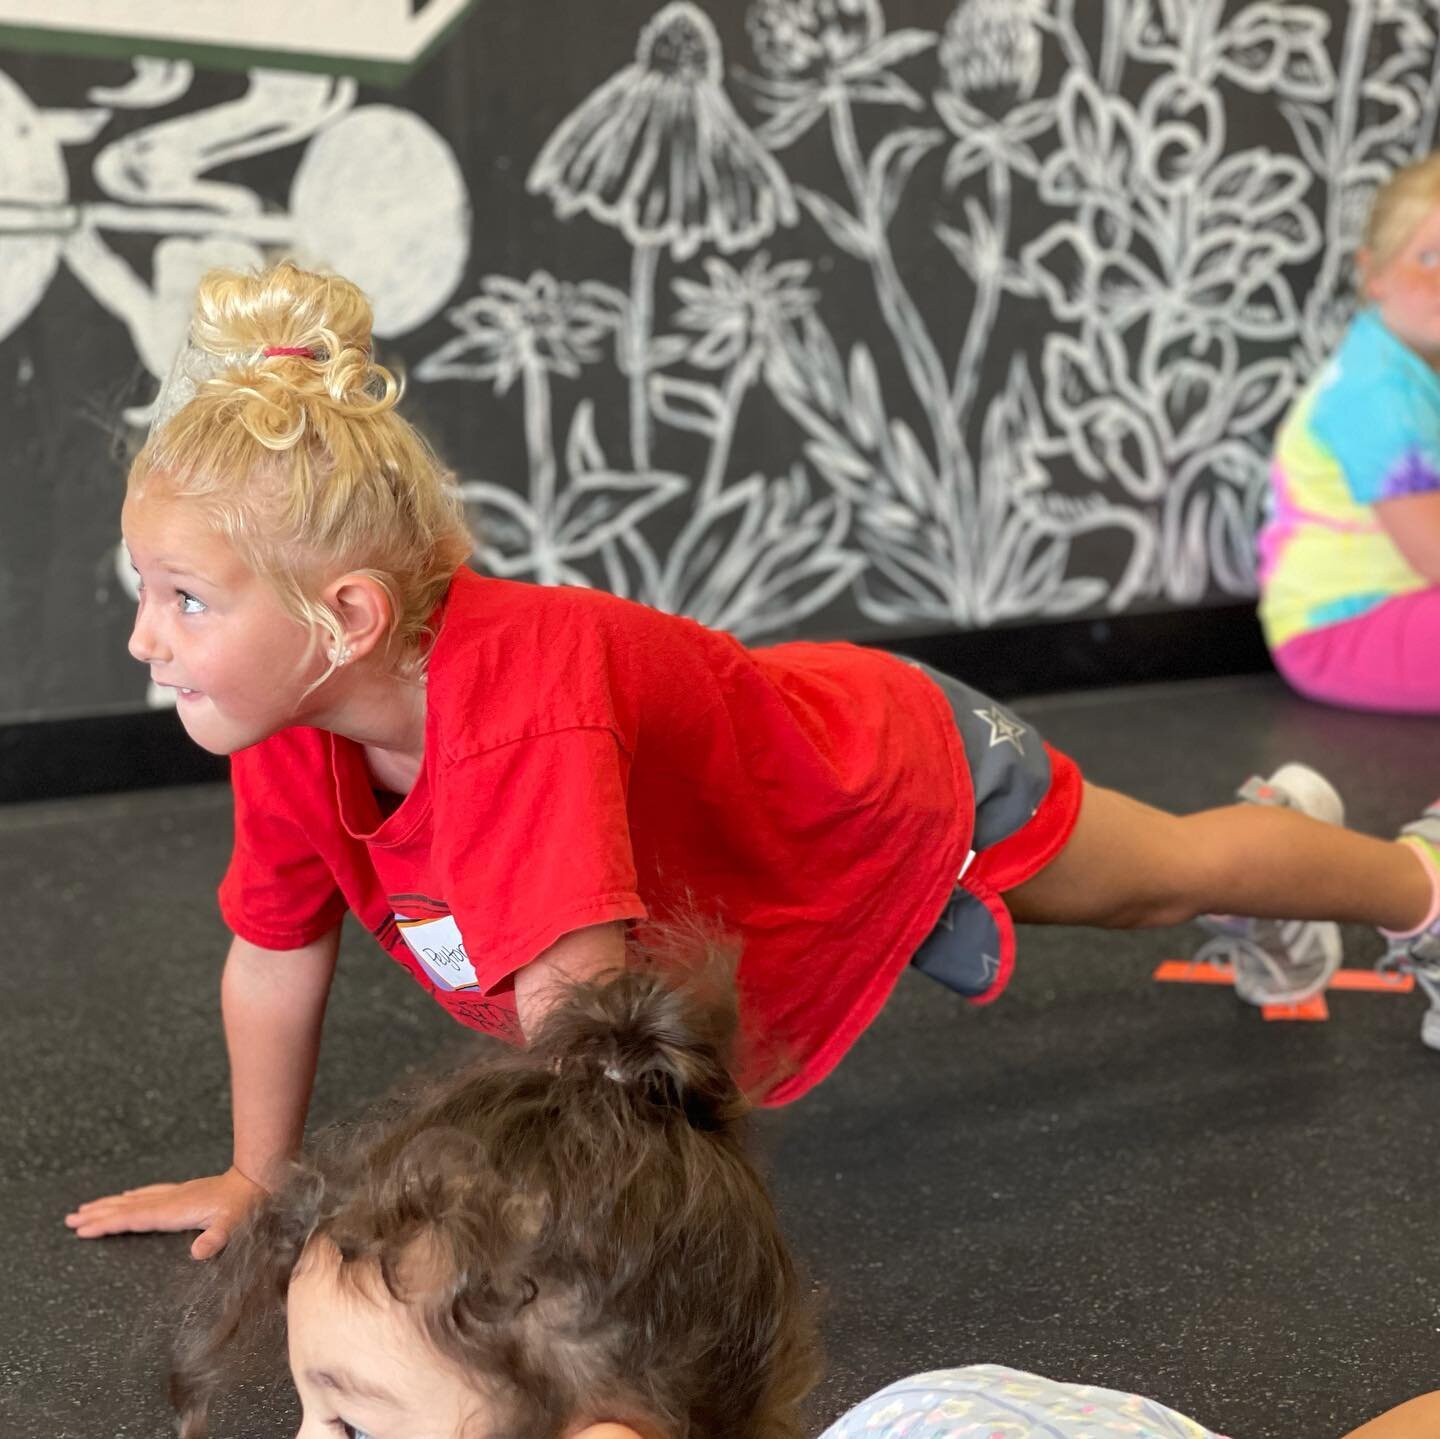 Today at Core Kids Camp we learned that it is good to do HARD things. And boy did we put that lesson to the test with max effort planks and wall-sits. These kiddos had jello arms and legs when it was over because they were committed to doing their be